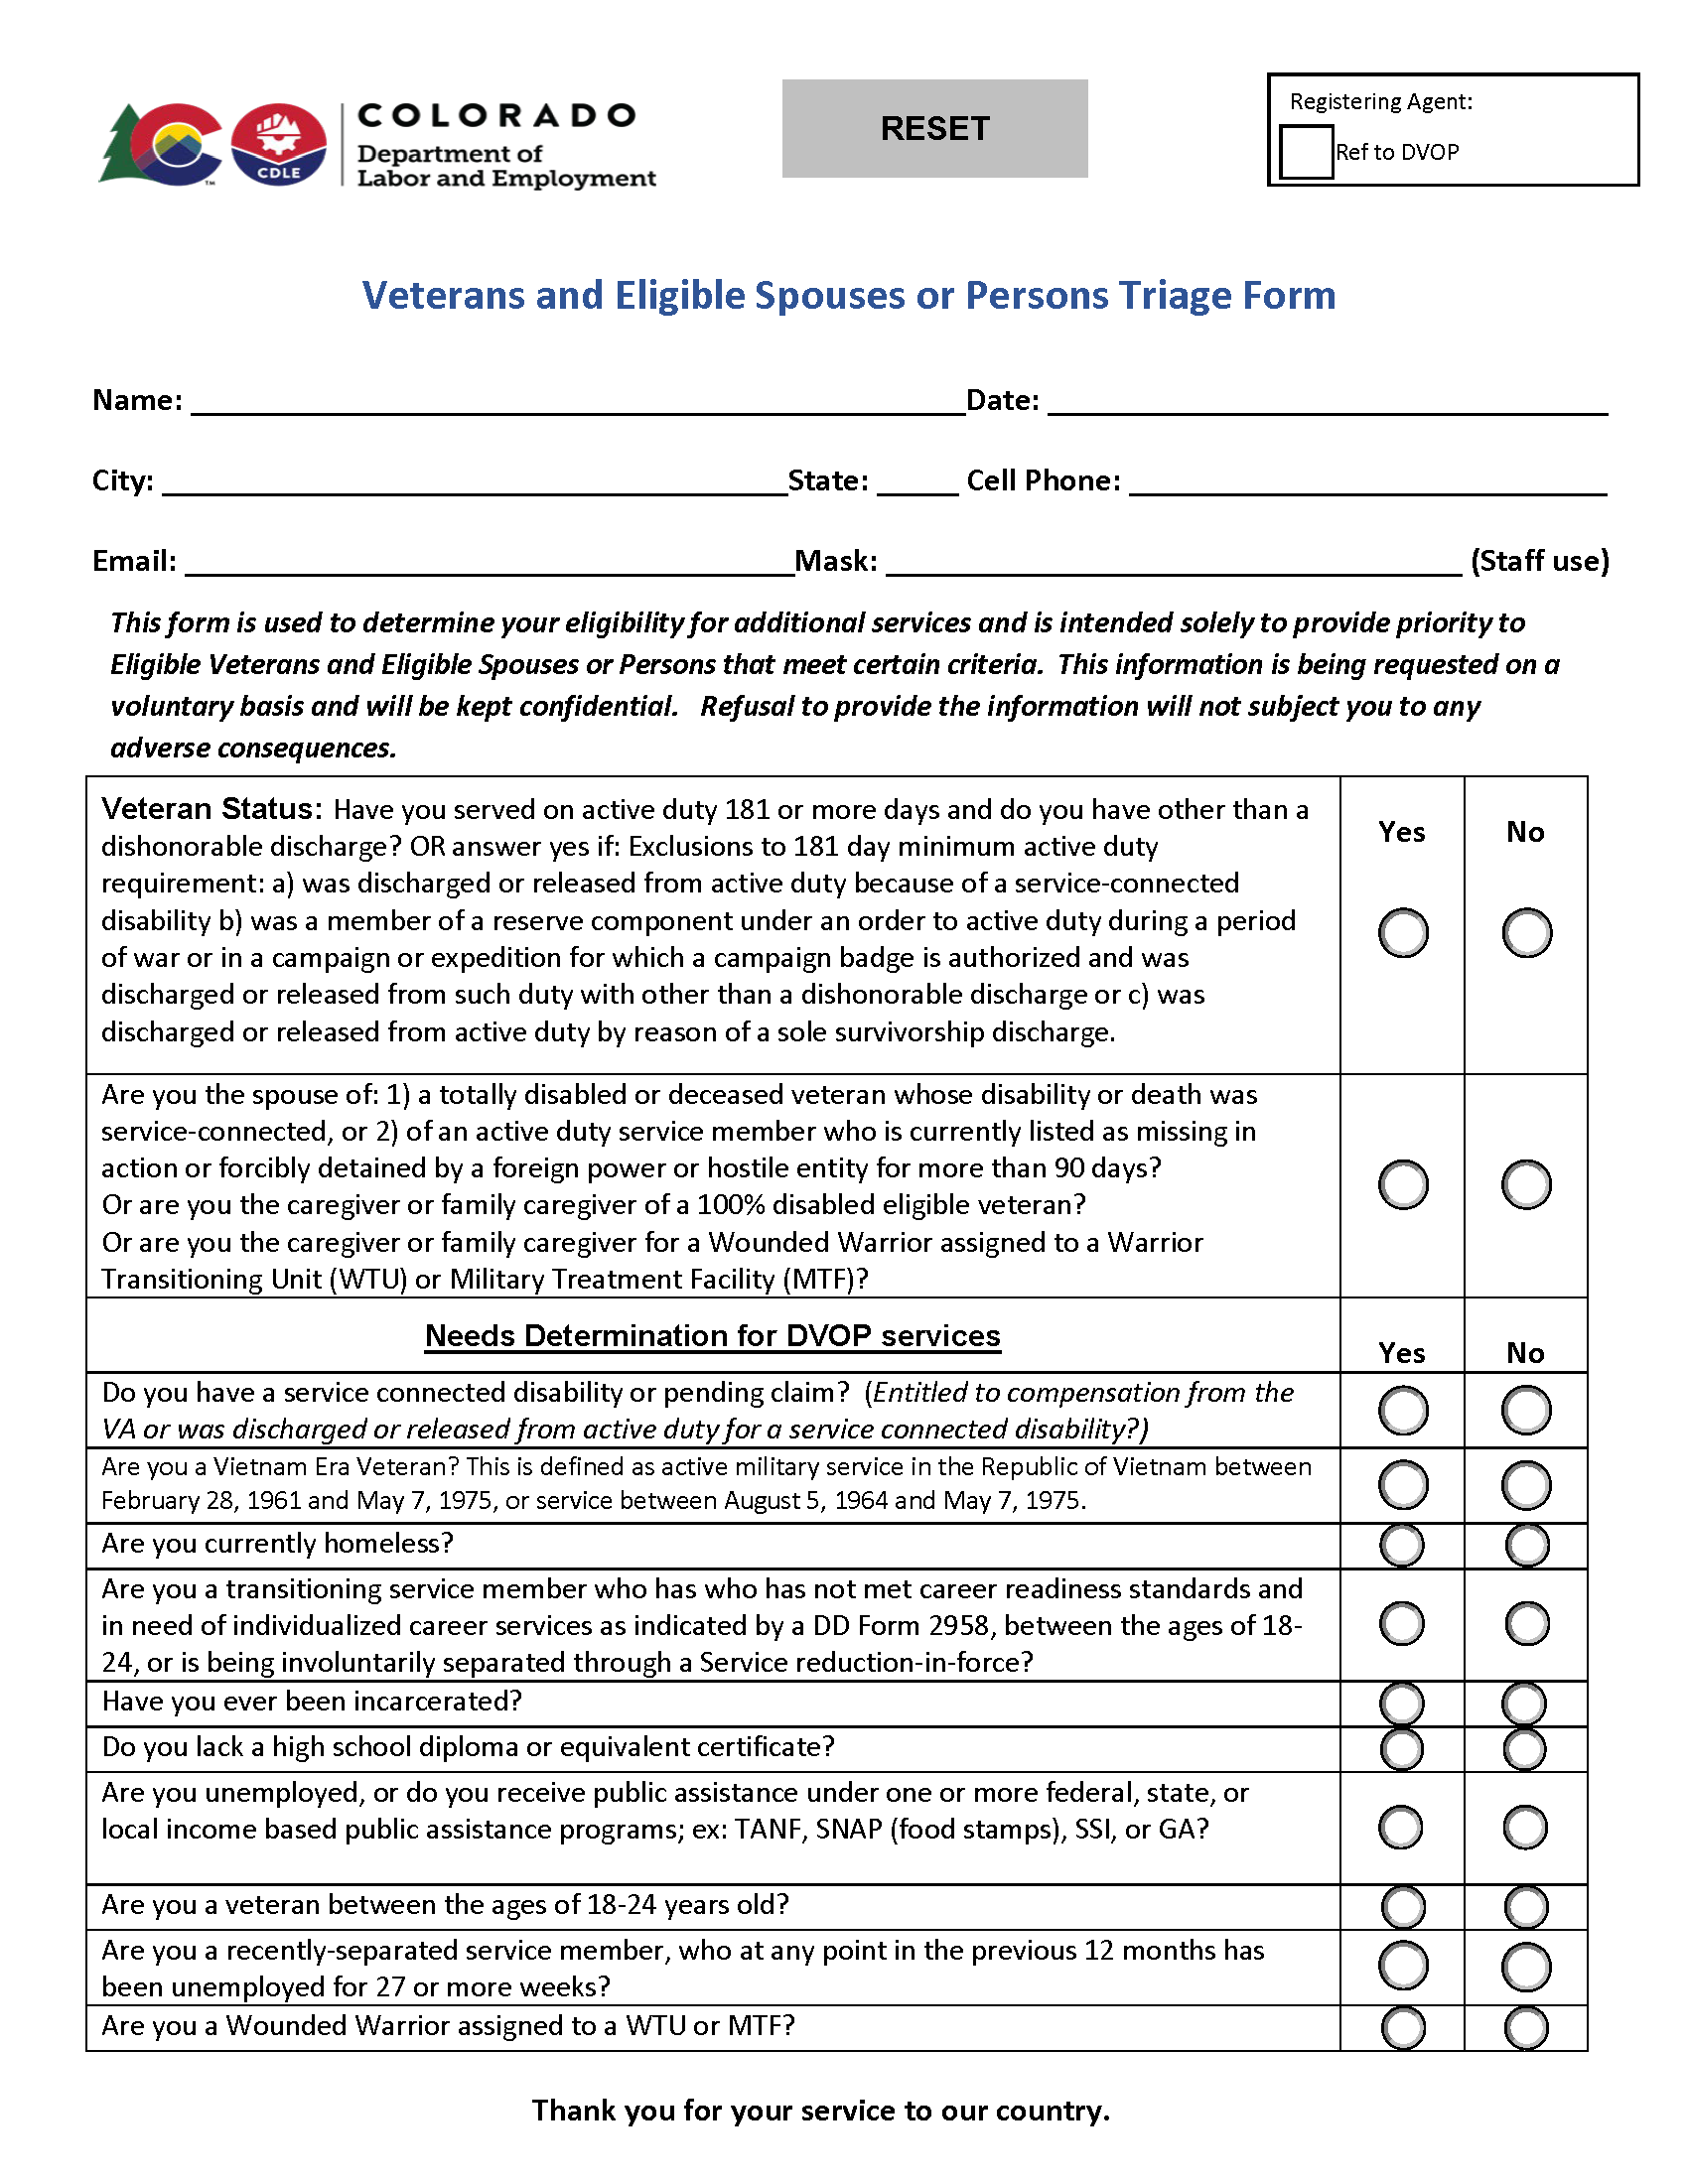 Veterans and Eligible Persons Triage Form